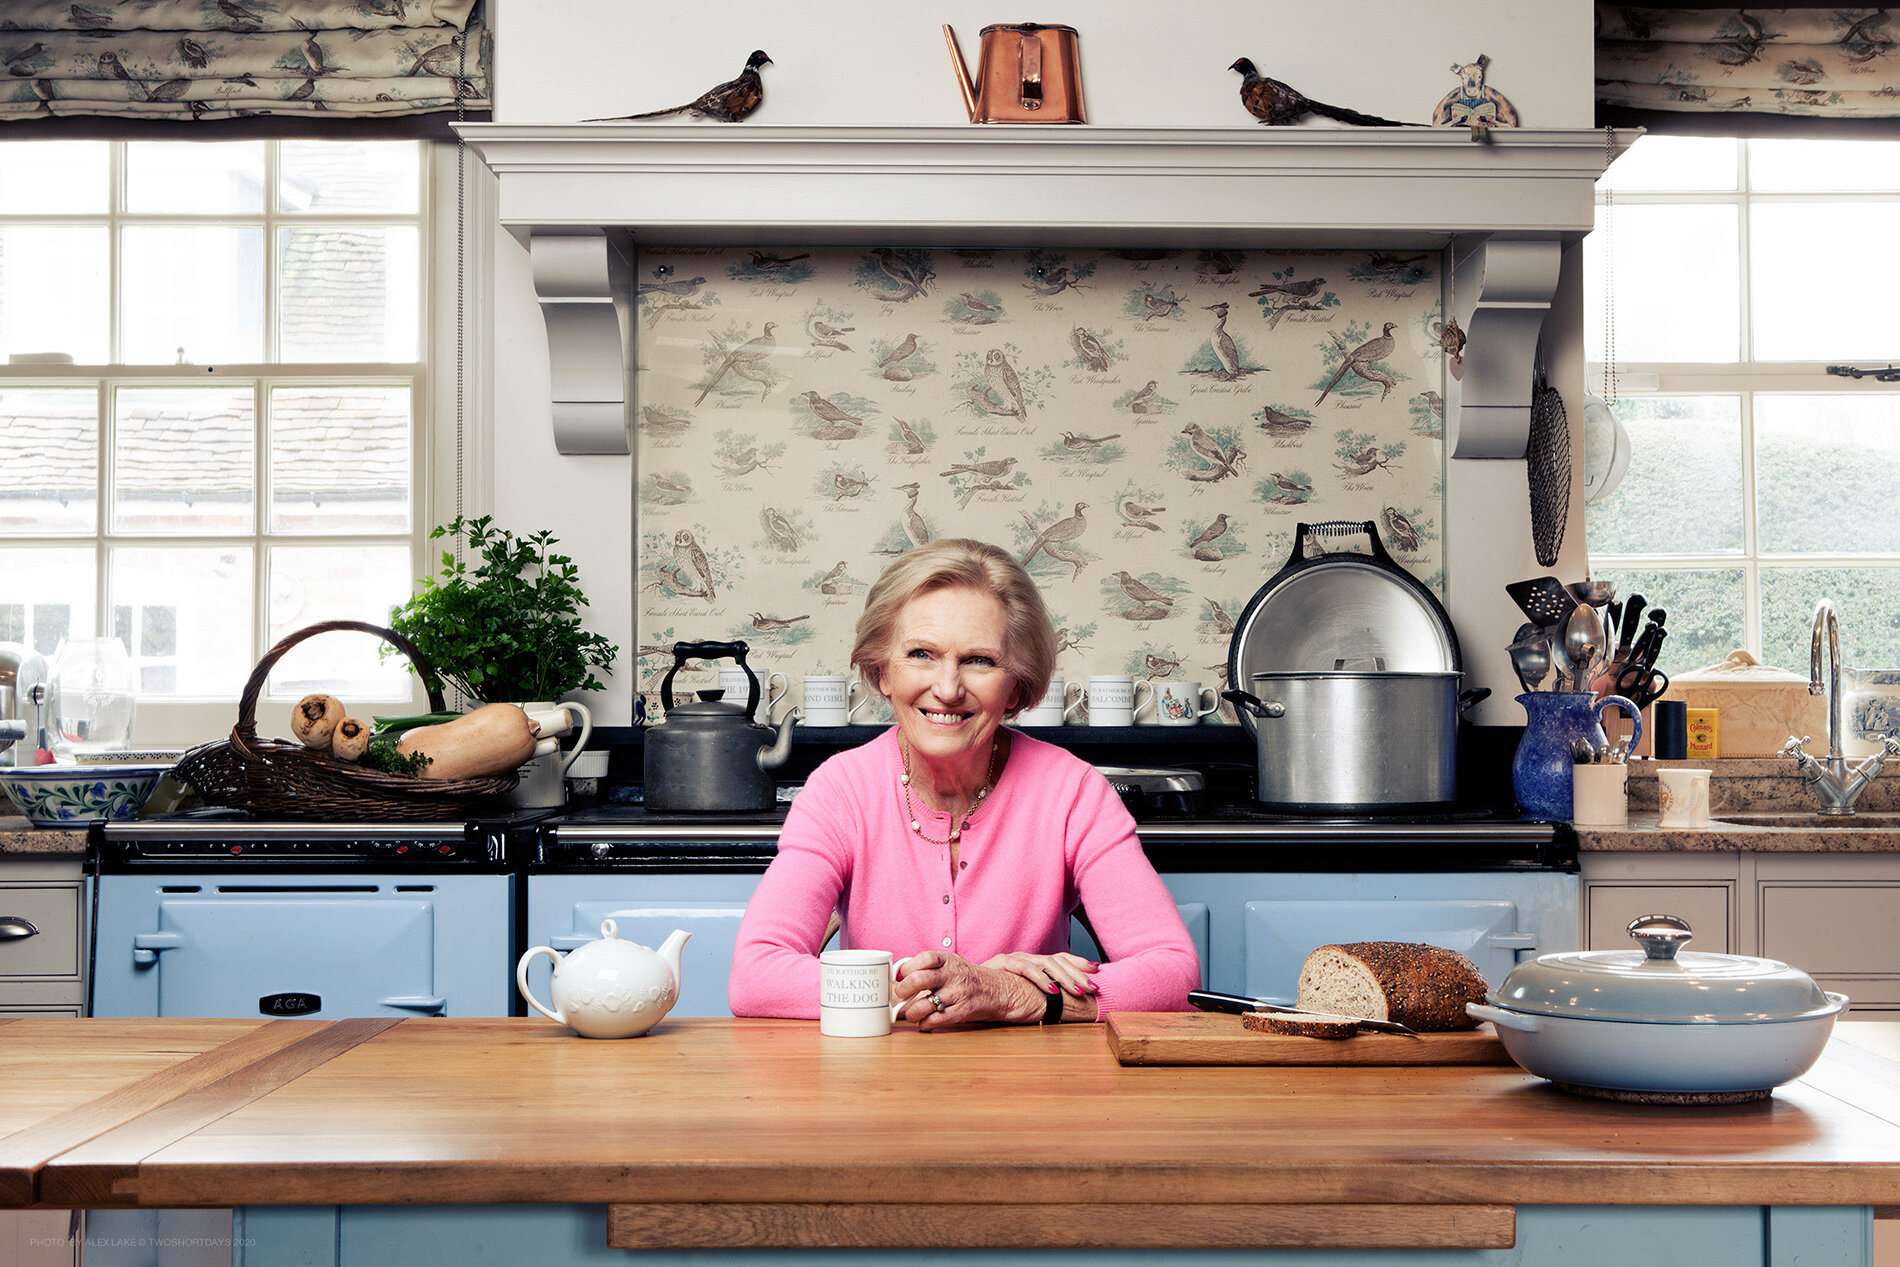 mary_berry_photography_copyright_ALEX_LAKE_do_not_reproduce_without_permission_TWOSHORTDAYS.jpg